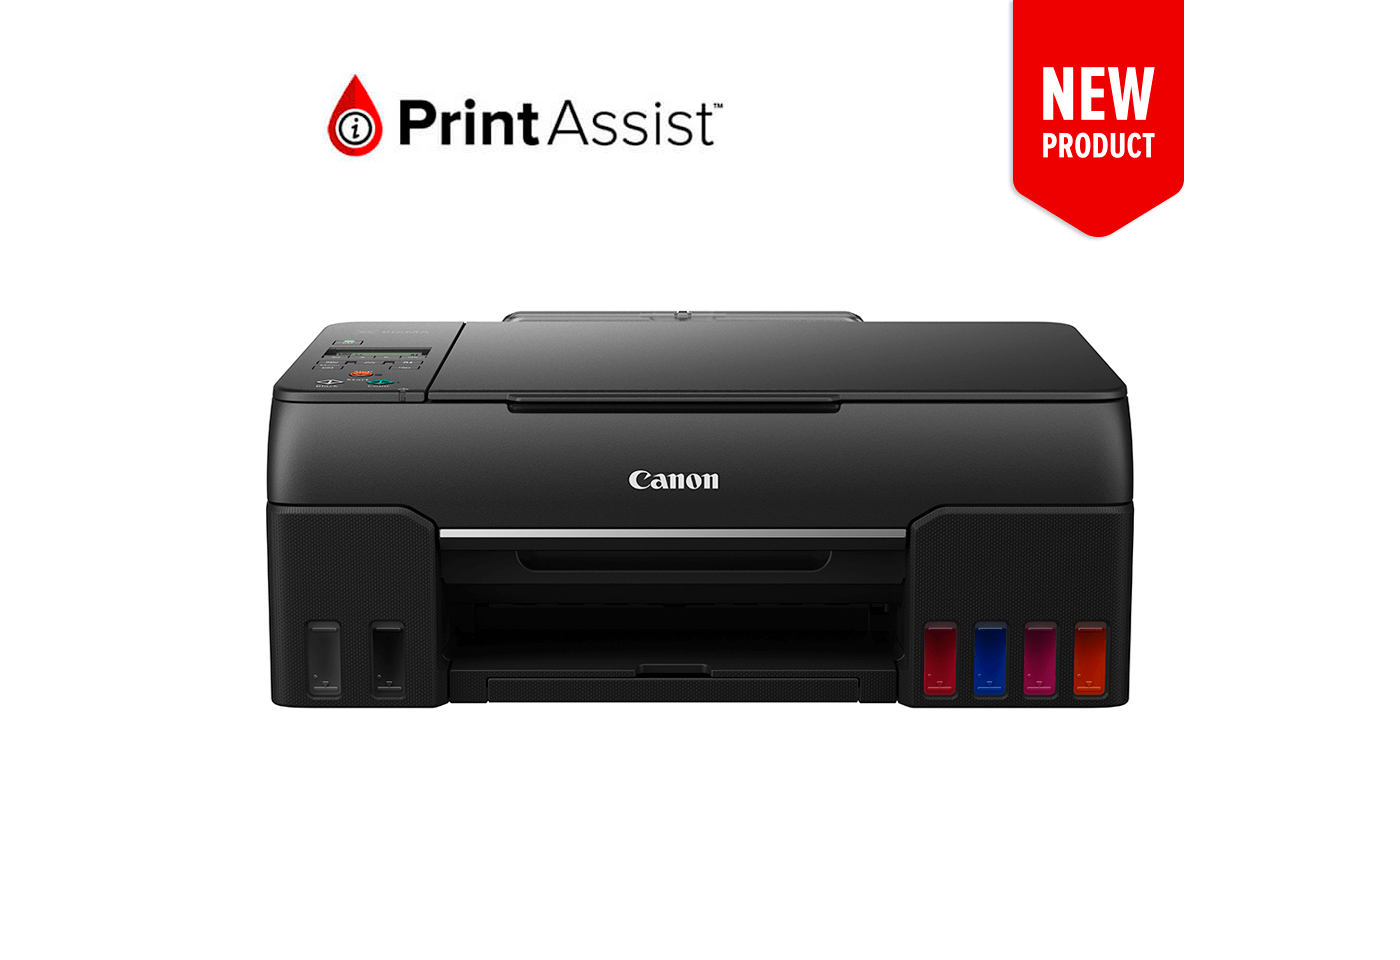 Product image of the new PIXMA G660 MegaTank printer with Print Assist